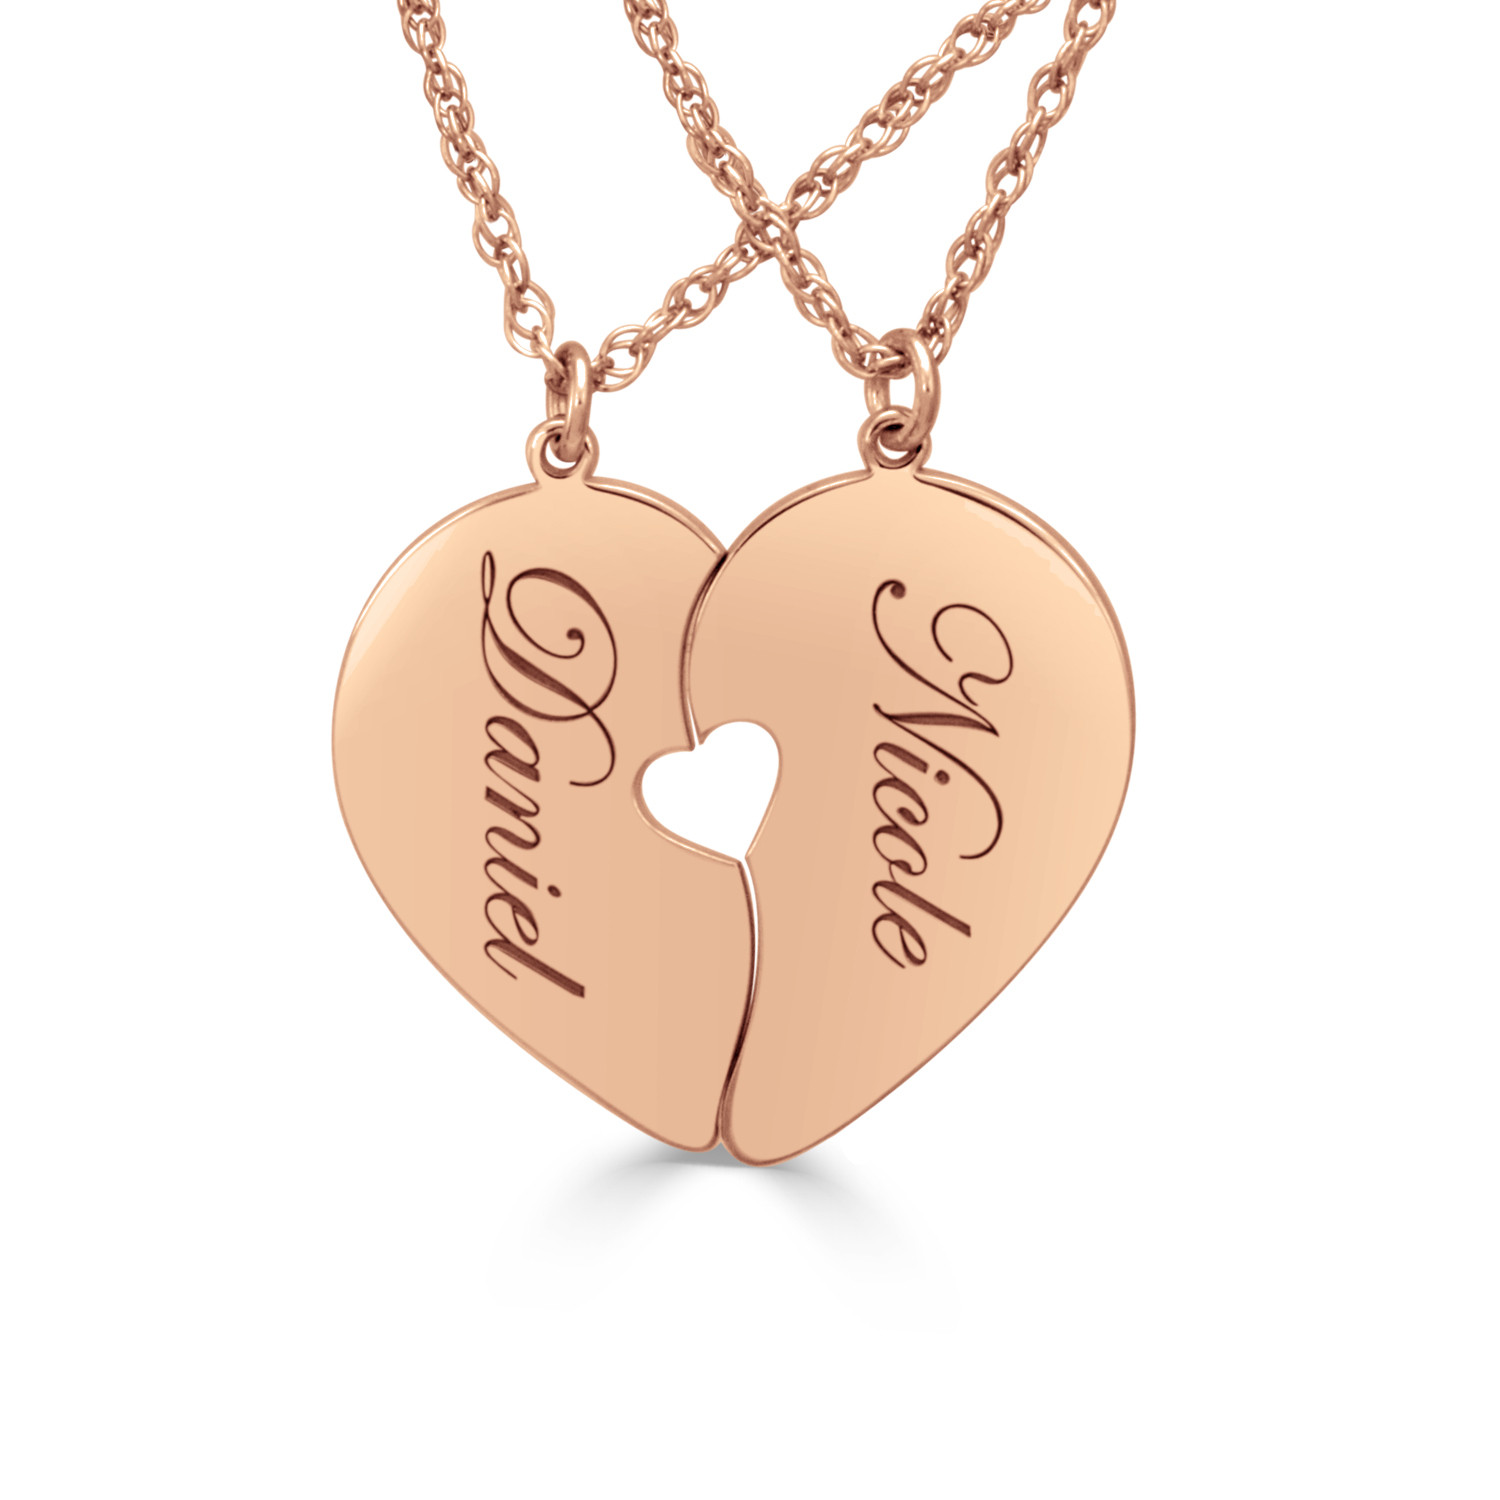 Floral Hand Engraved initials Signet Monogram Heart Necklace Charm Pendant 14K Rose Gold / Front Side Only